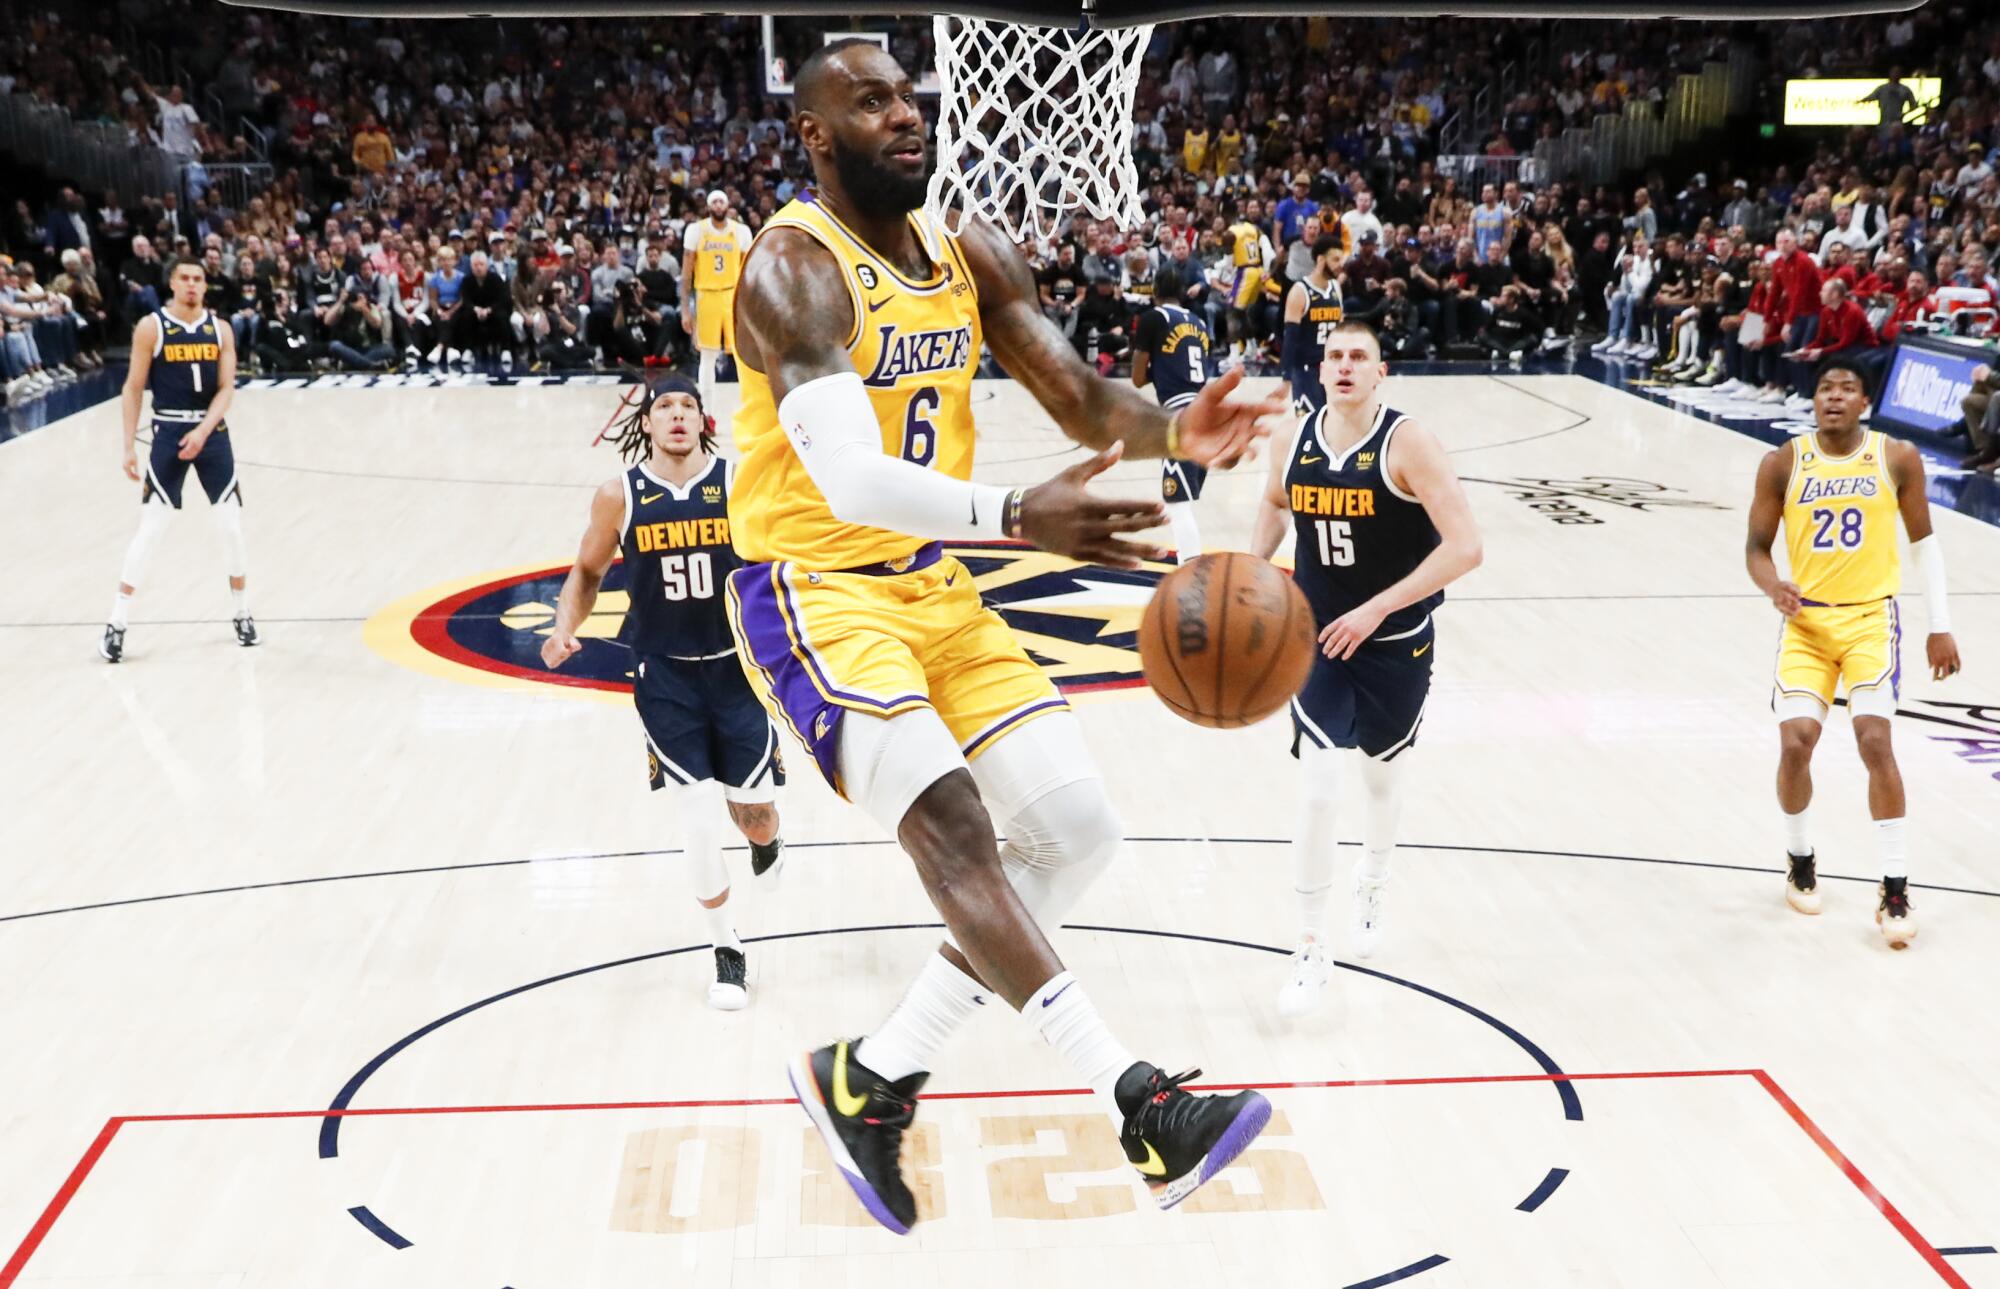 Lakers forward LeBron James loses the ball while going up for a slam dunk against the Denver Nuggets.